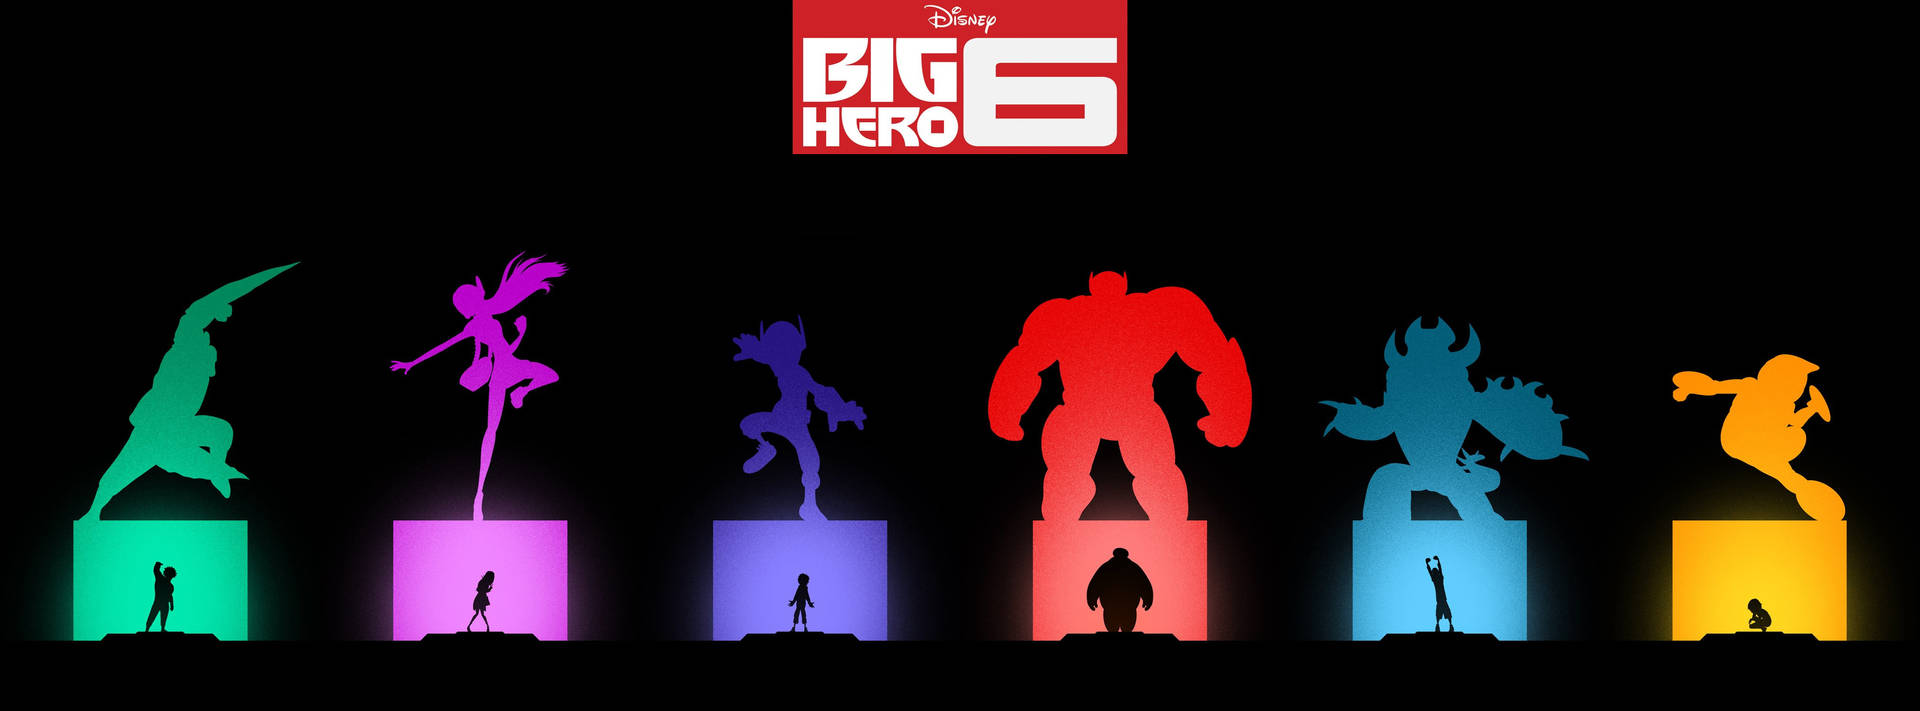 Big Hero 6 Colorful Silhouettes Background